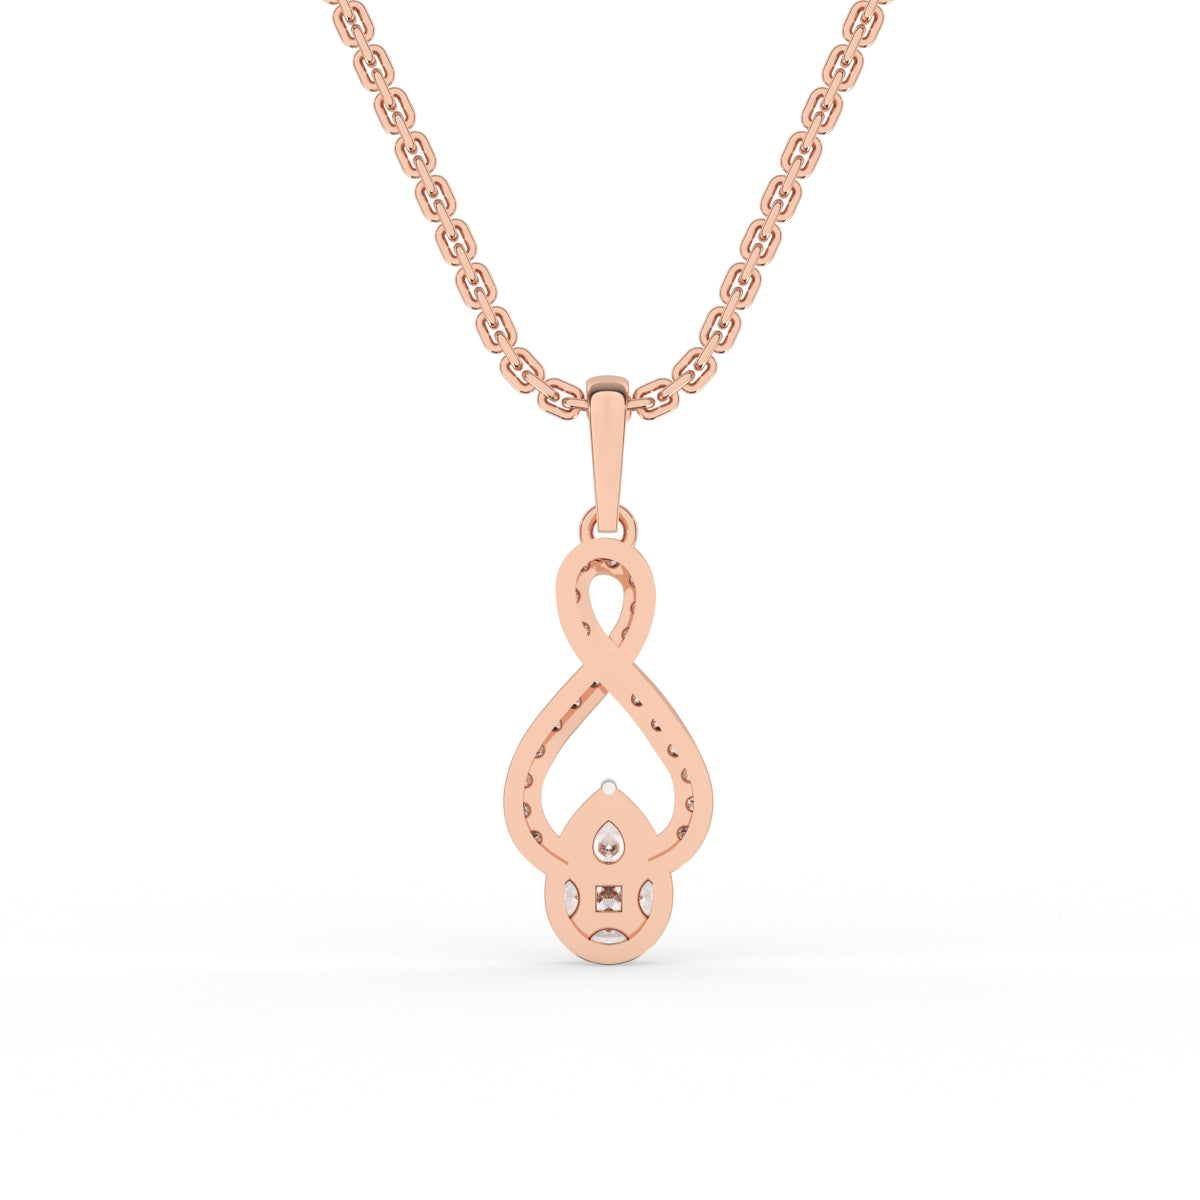 Jss creation Real Diamonds Infinity Diamond Pendant at Rs 22680 in New Delhi